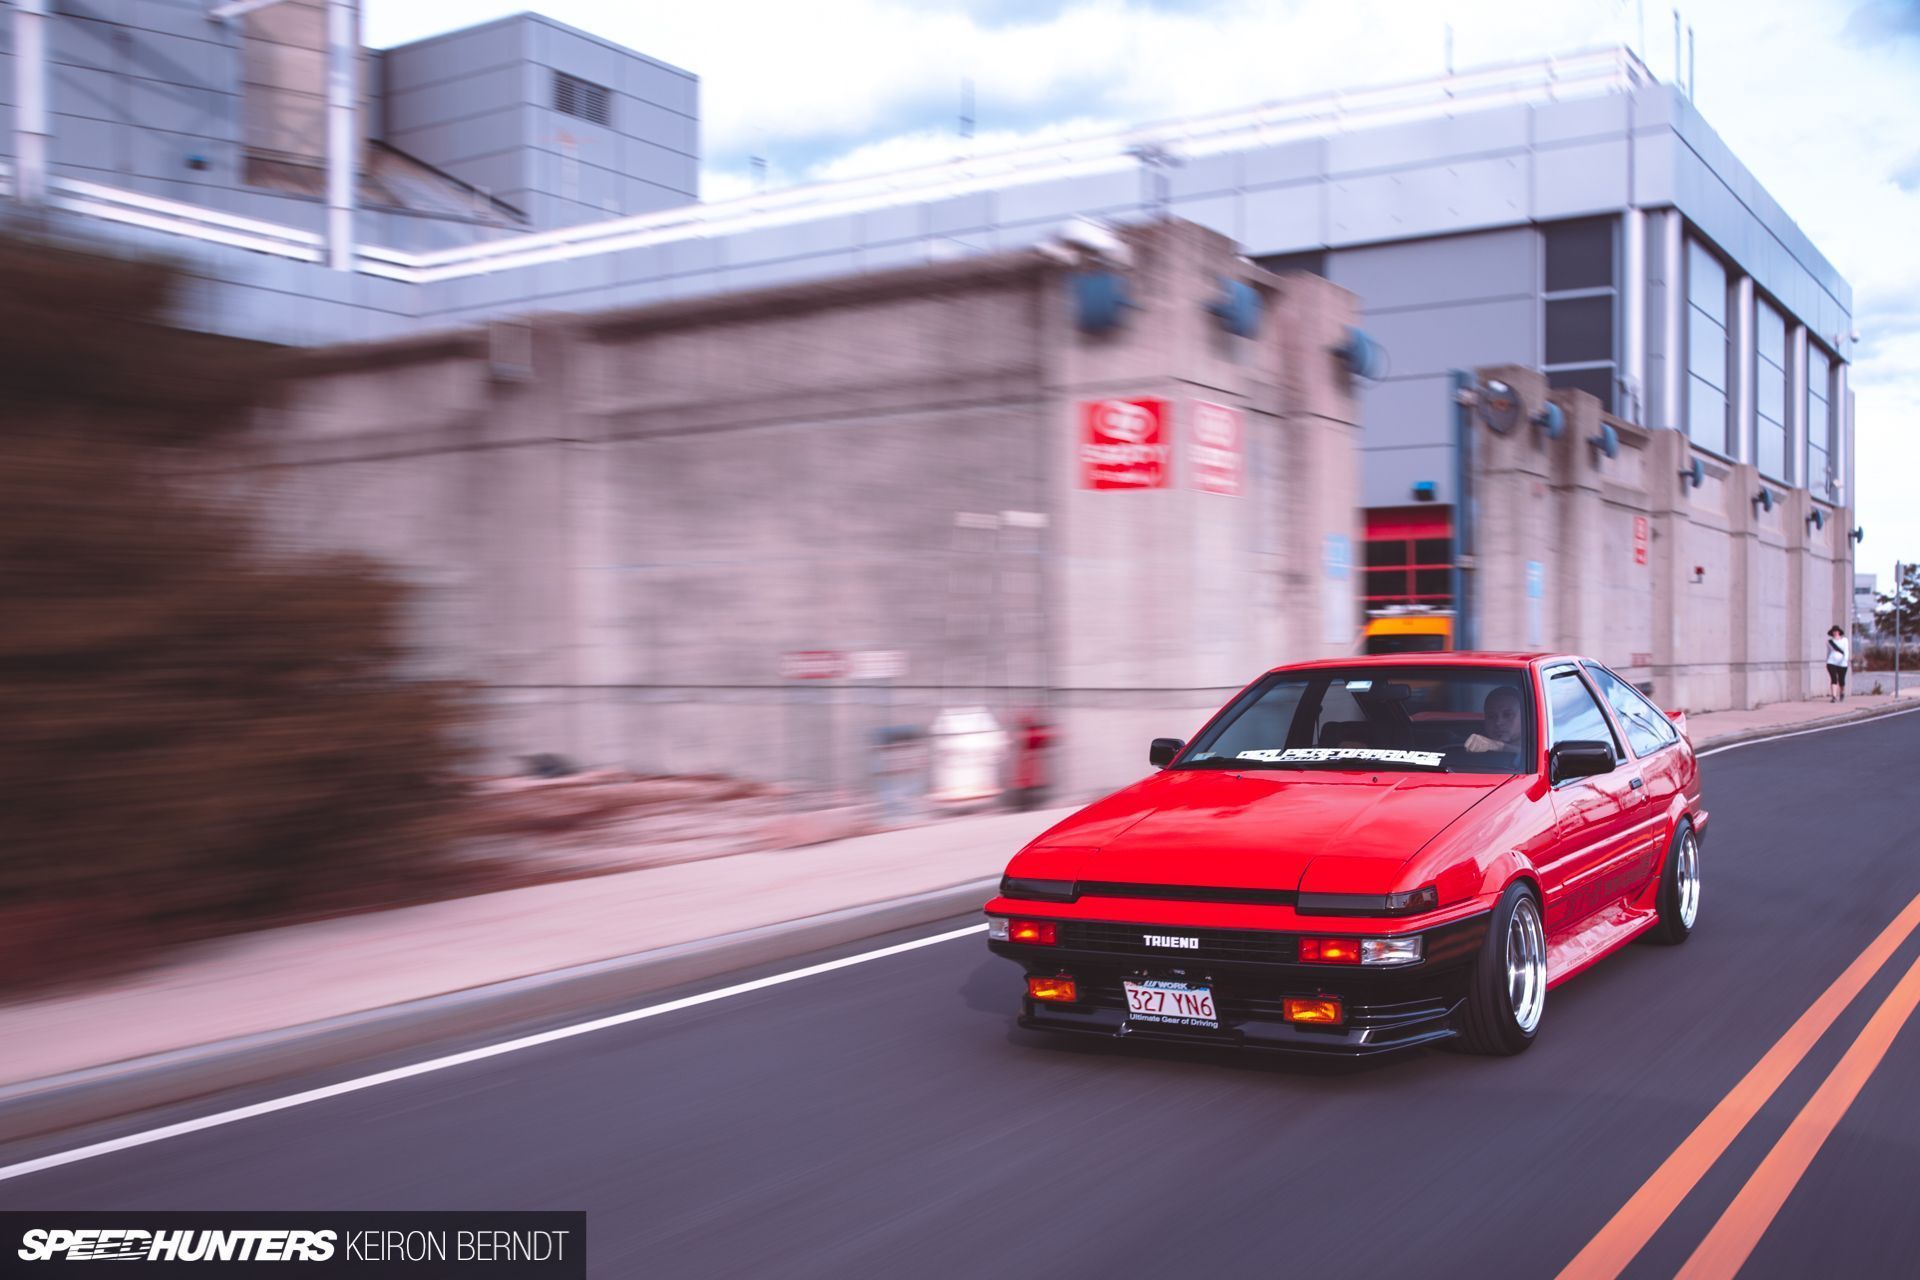 A red car driving down a street next to a building. - Toyota AE86